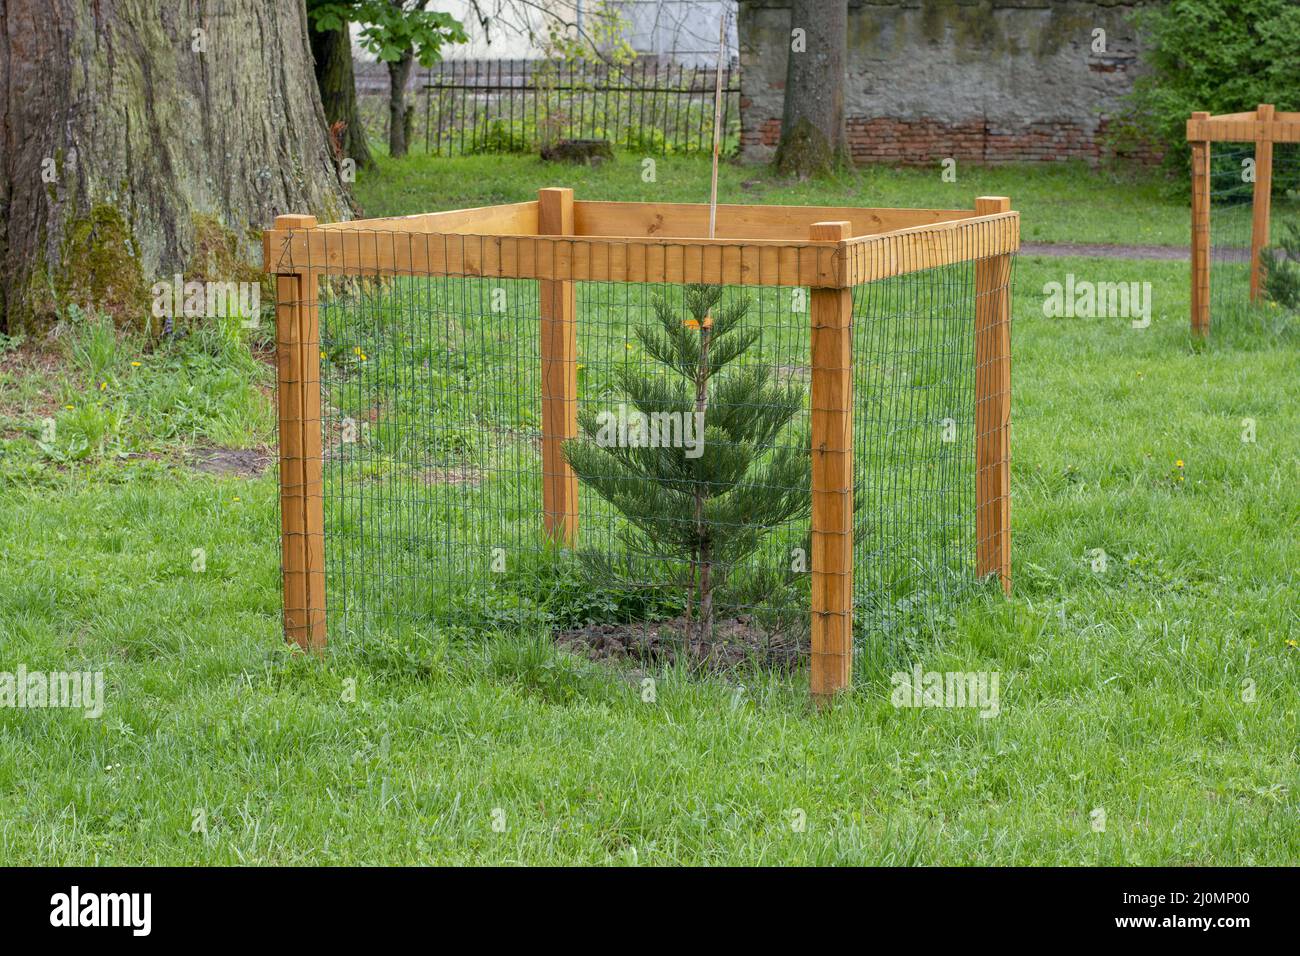 Mesh tree guard protecting young tree from wildlife damage. Fence protecting tree in the park. Stock Photo